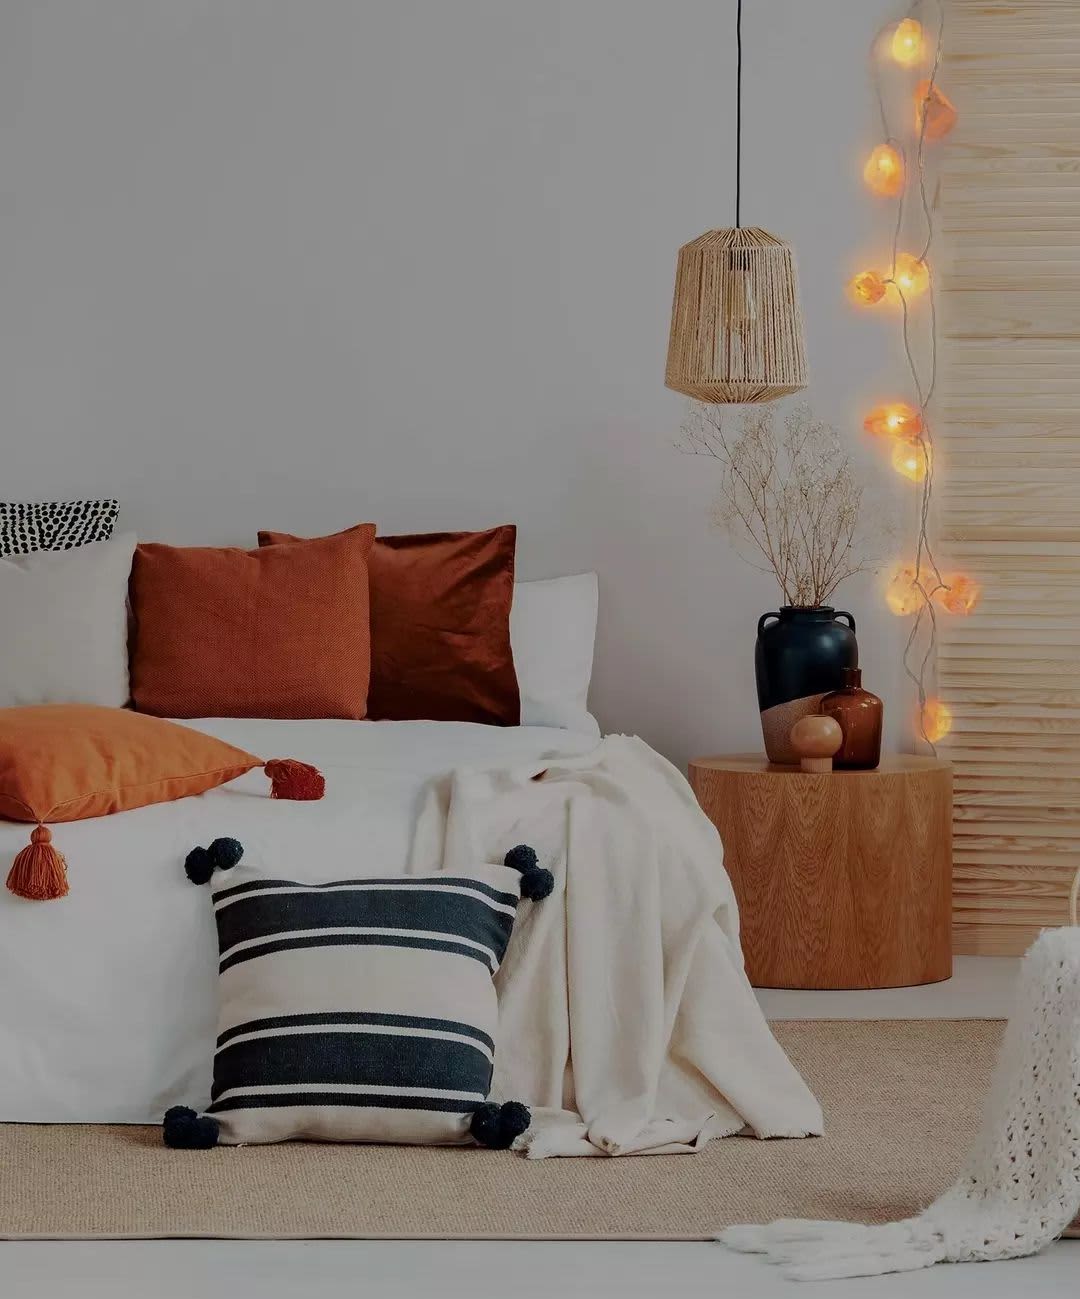 Fairy Light Ideas: 30 Amazing Ways To Use String Lights At Home